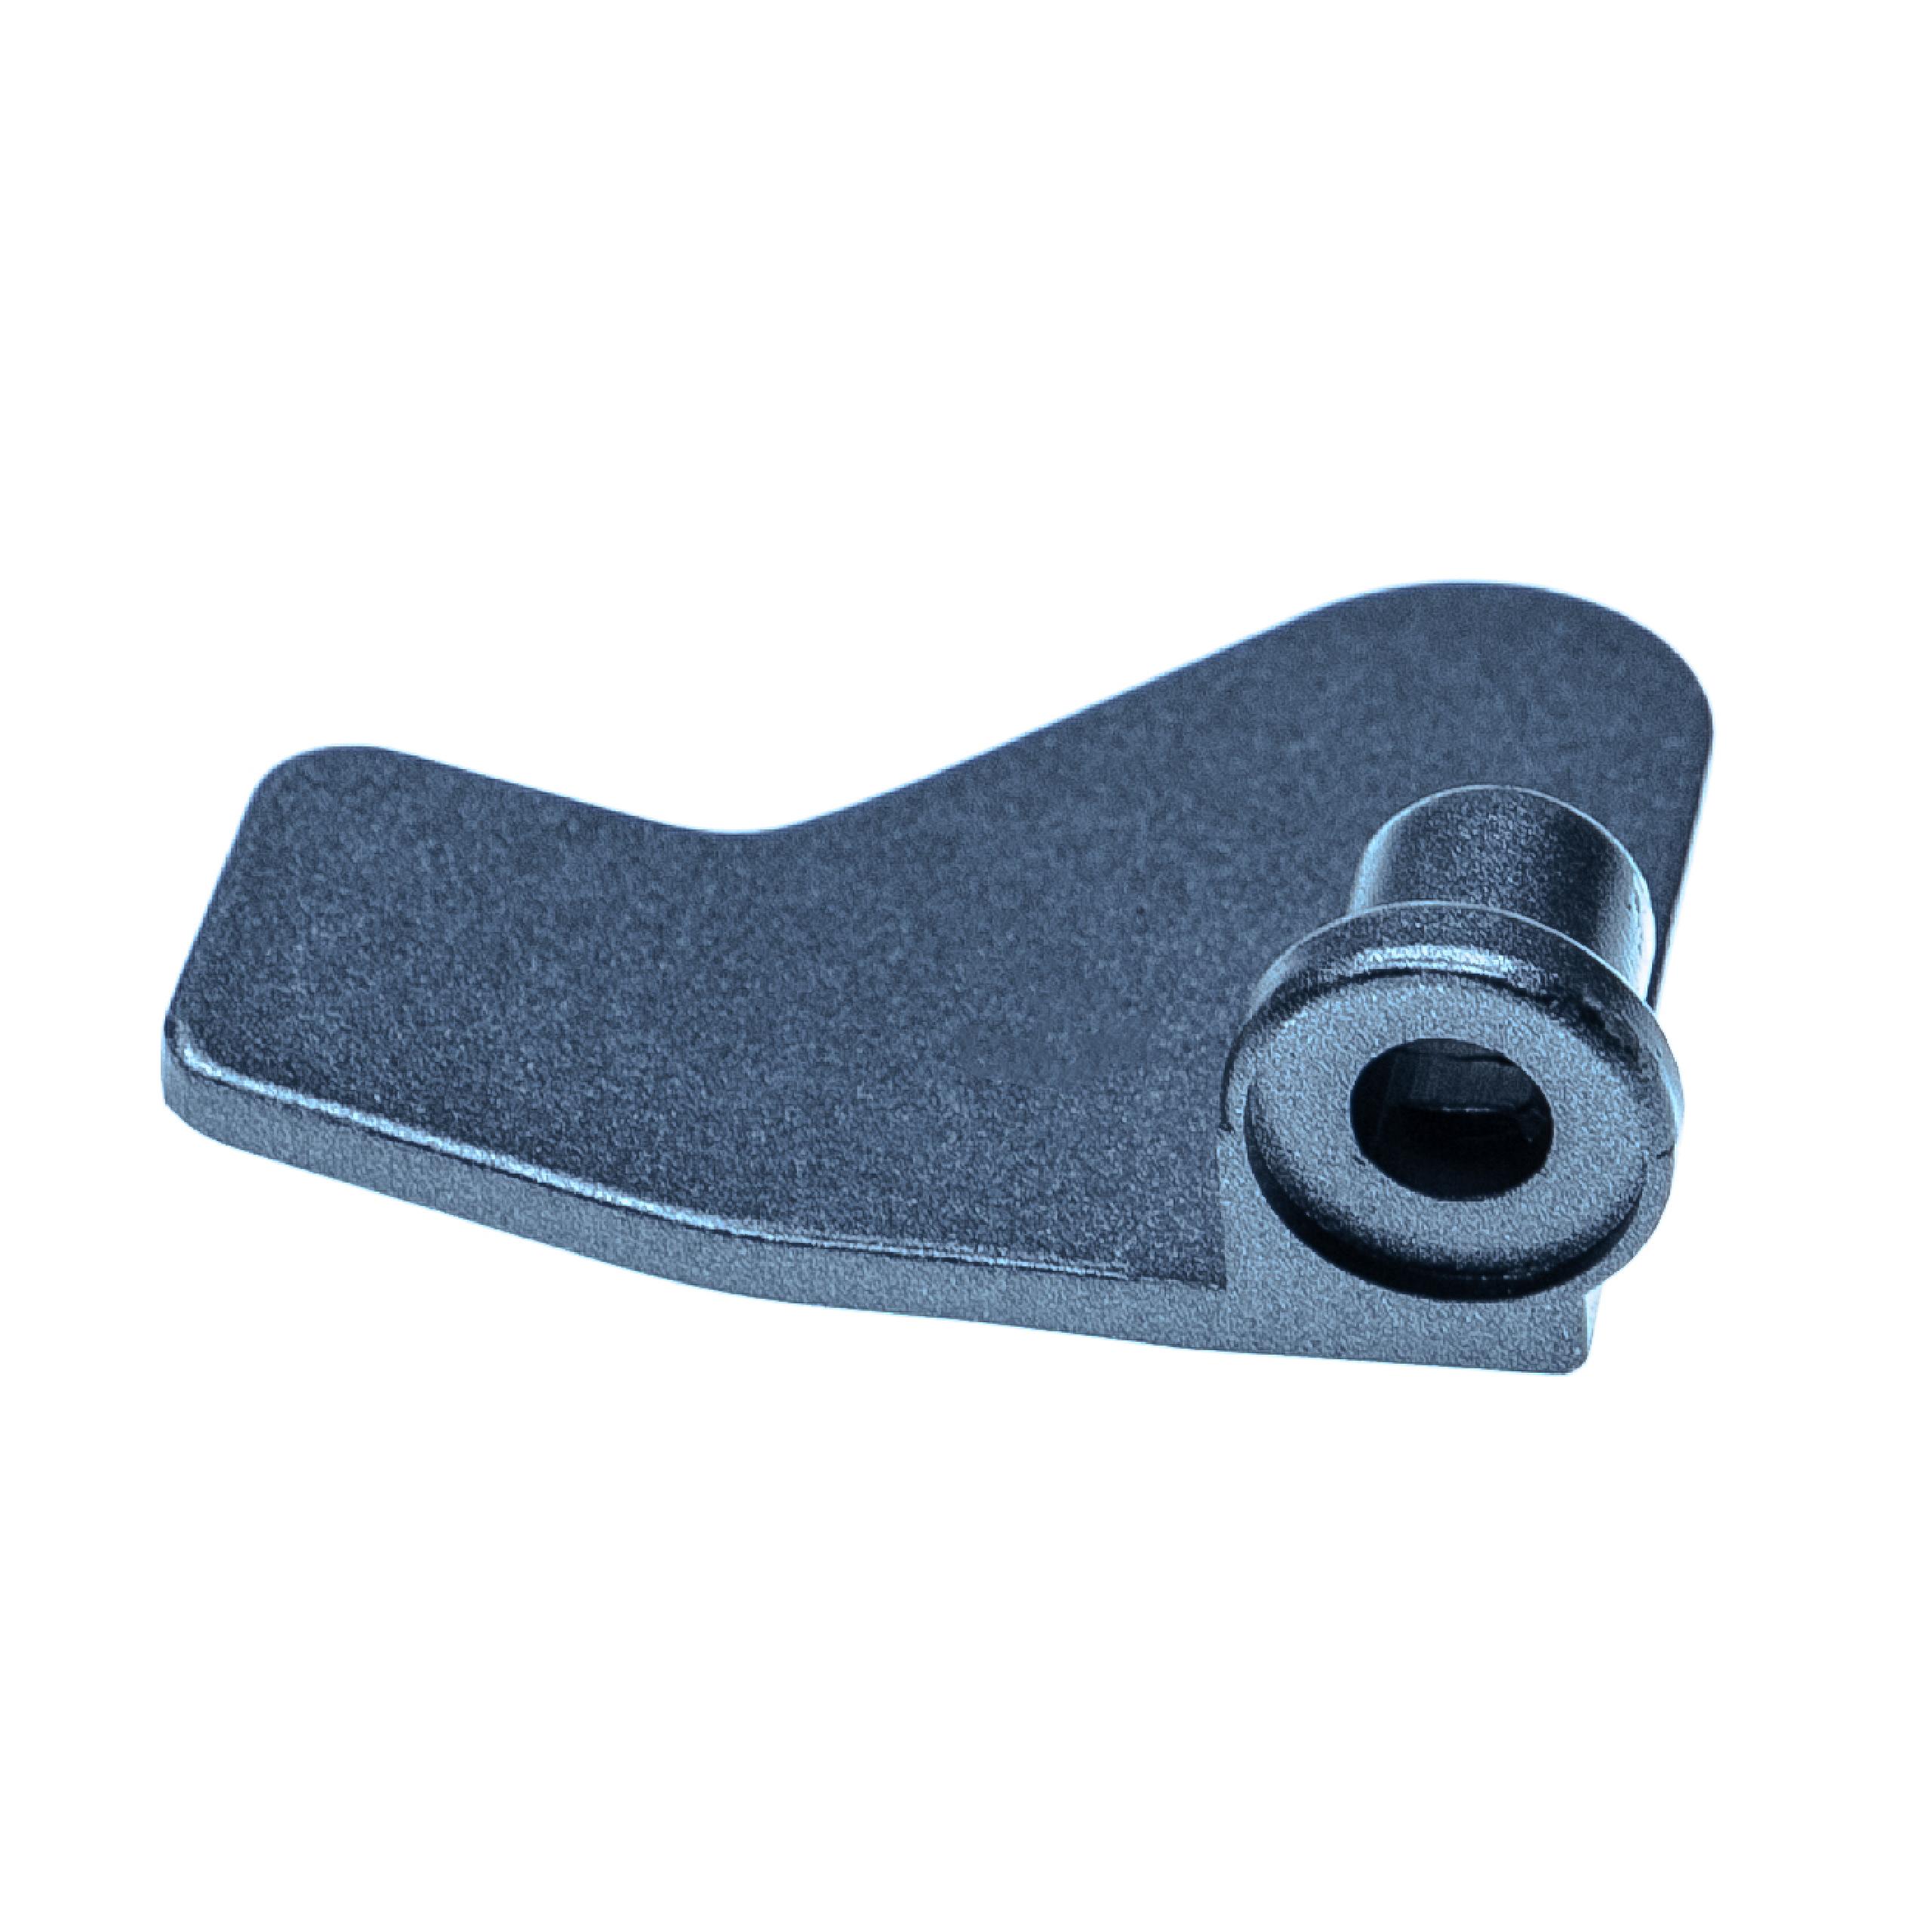 Dough Hook Replacement for KW 712246 for Bread-Maker - Mixing Paddle, grey